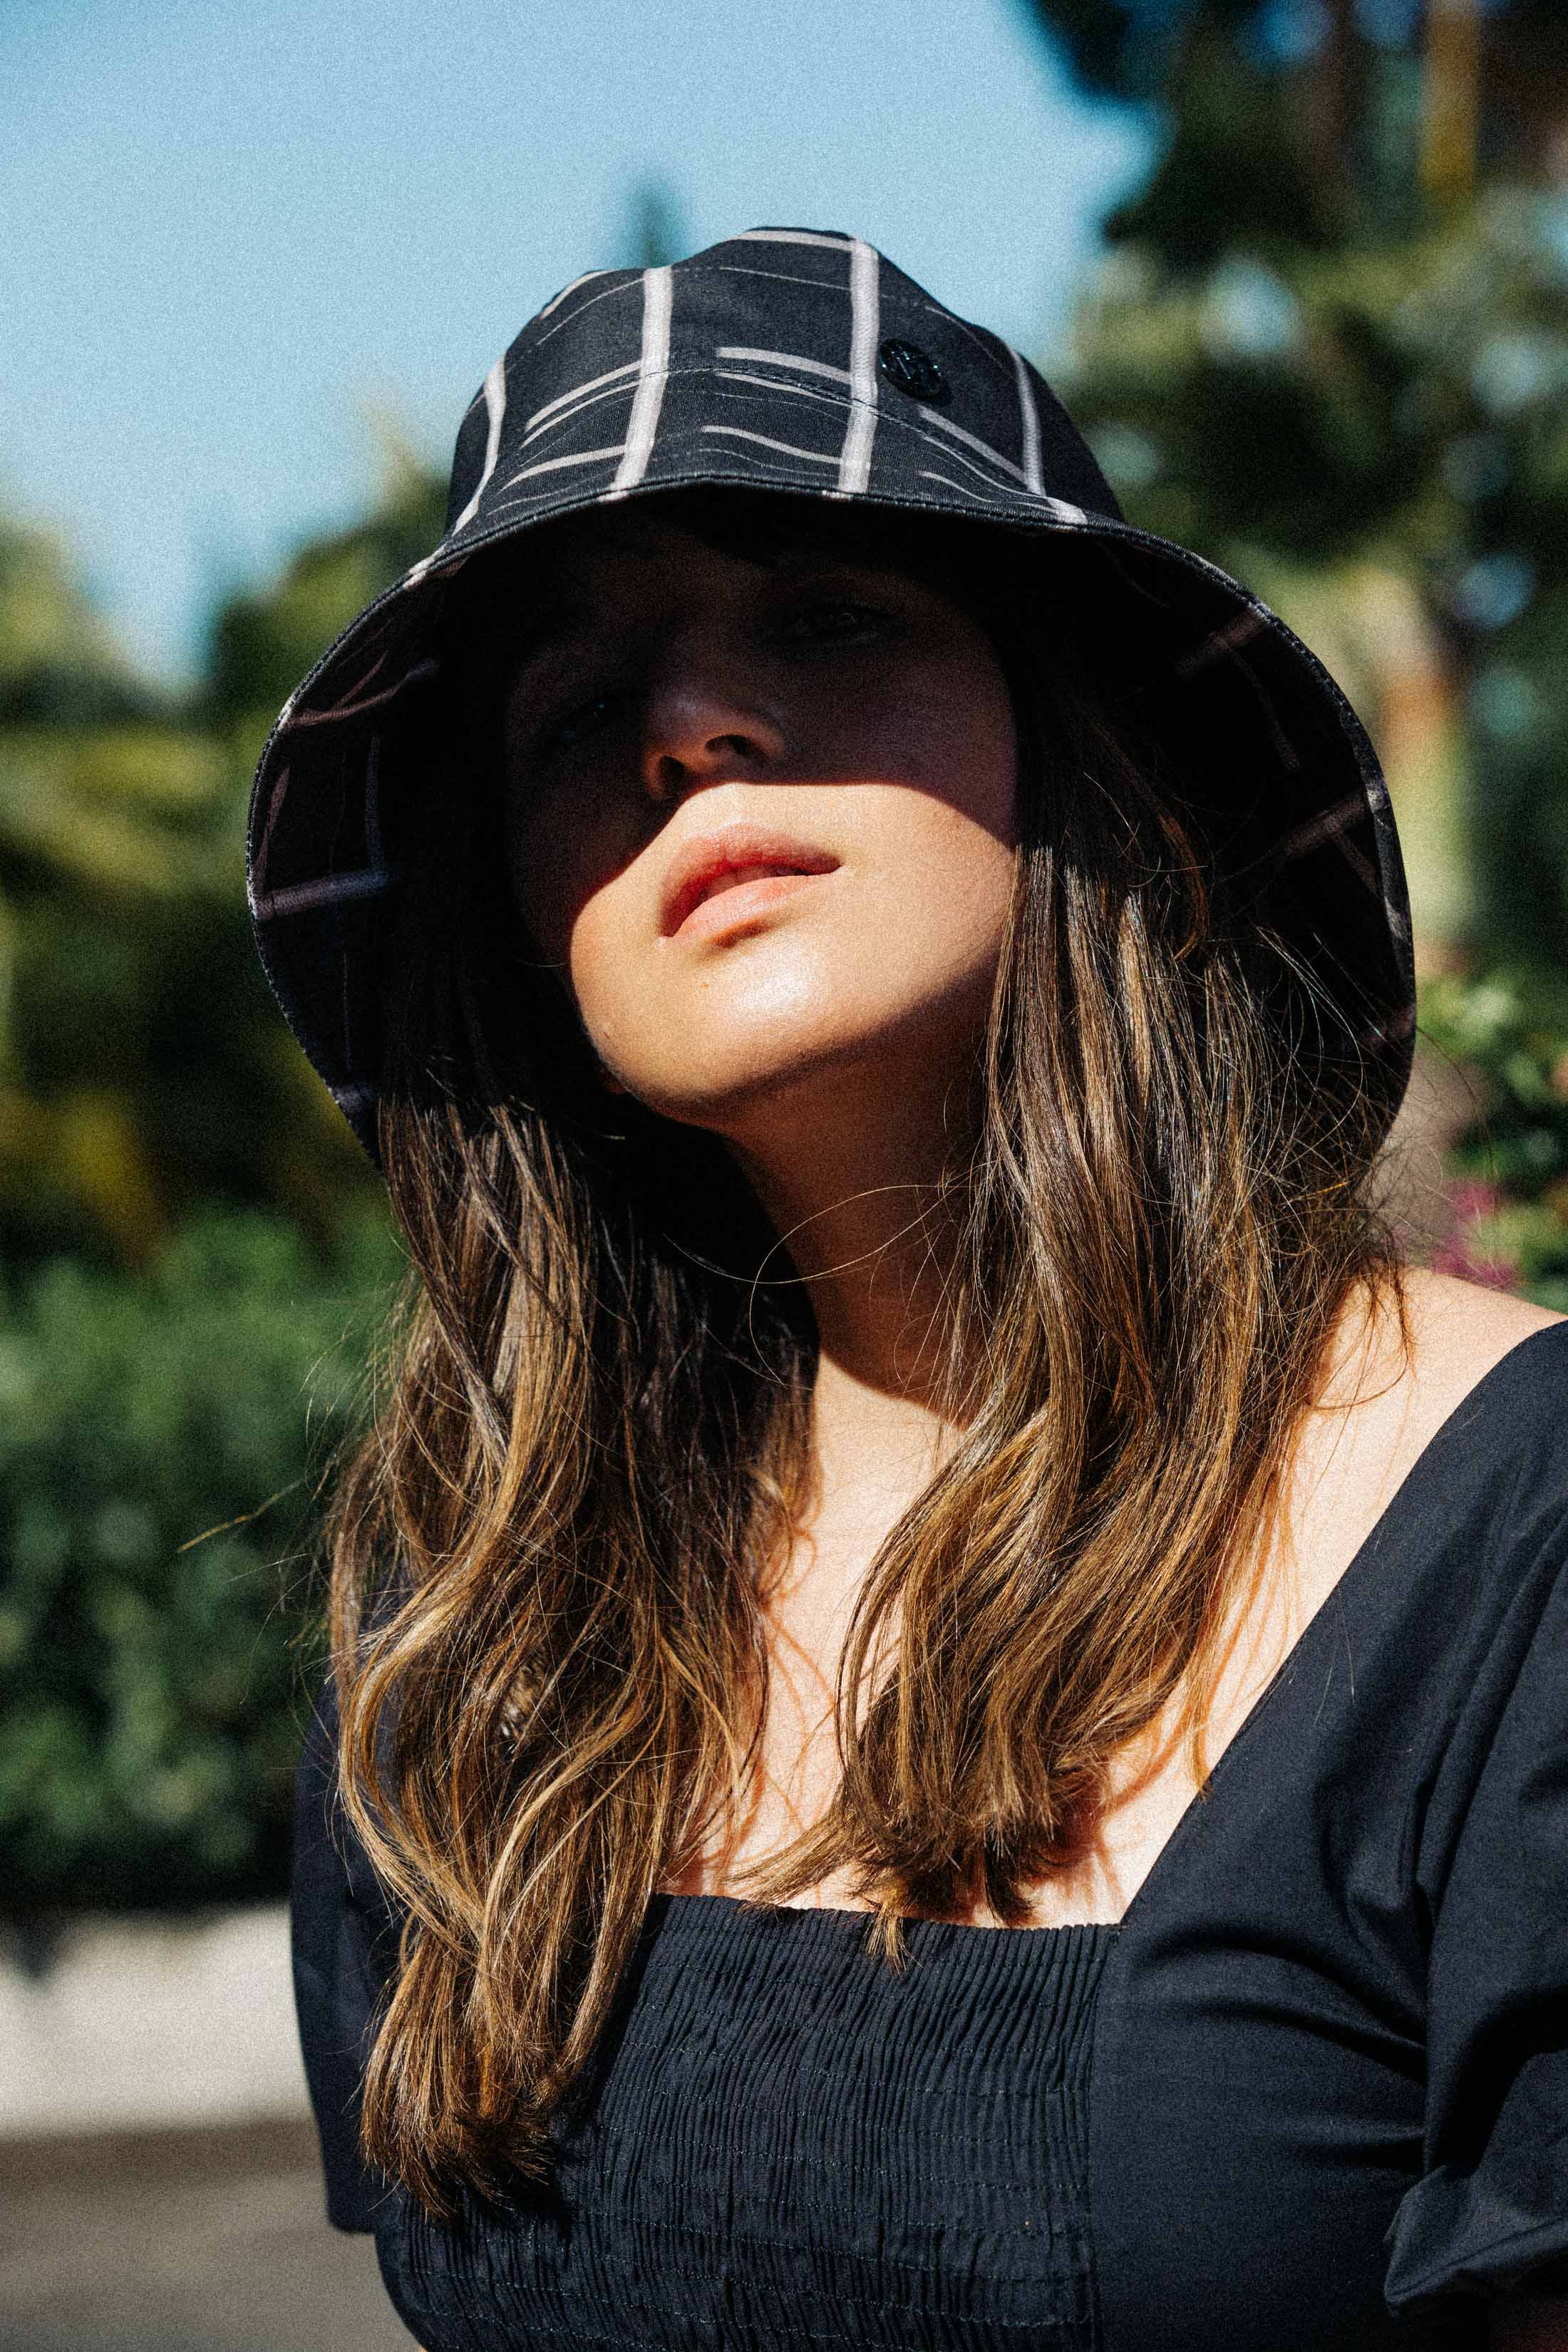 Maristella wears the Paulina hat from Maison Michel Spring 2019